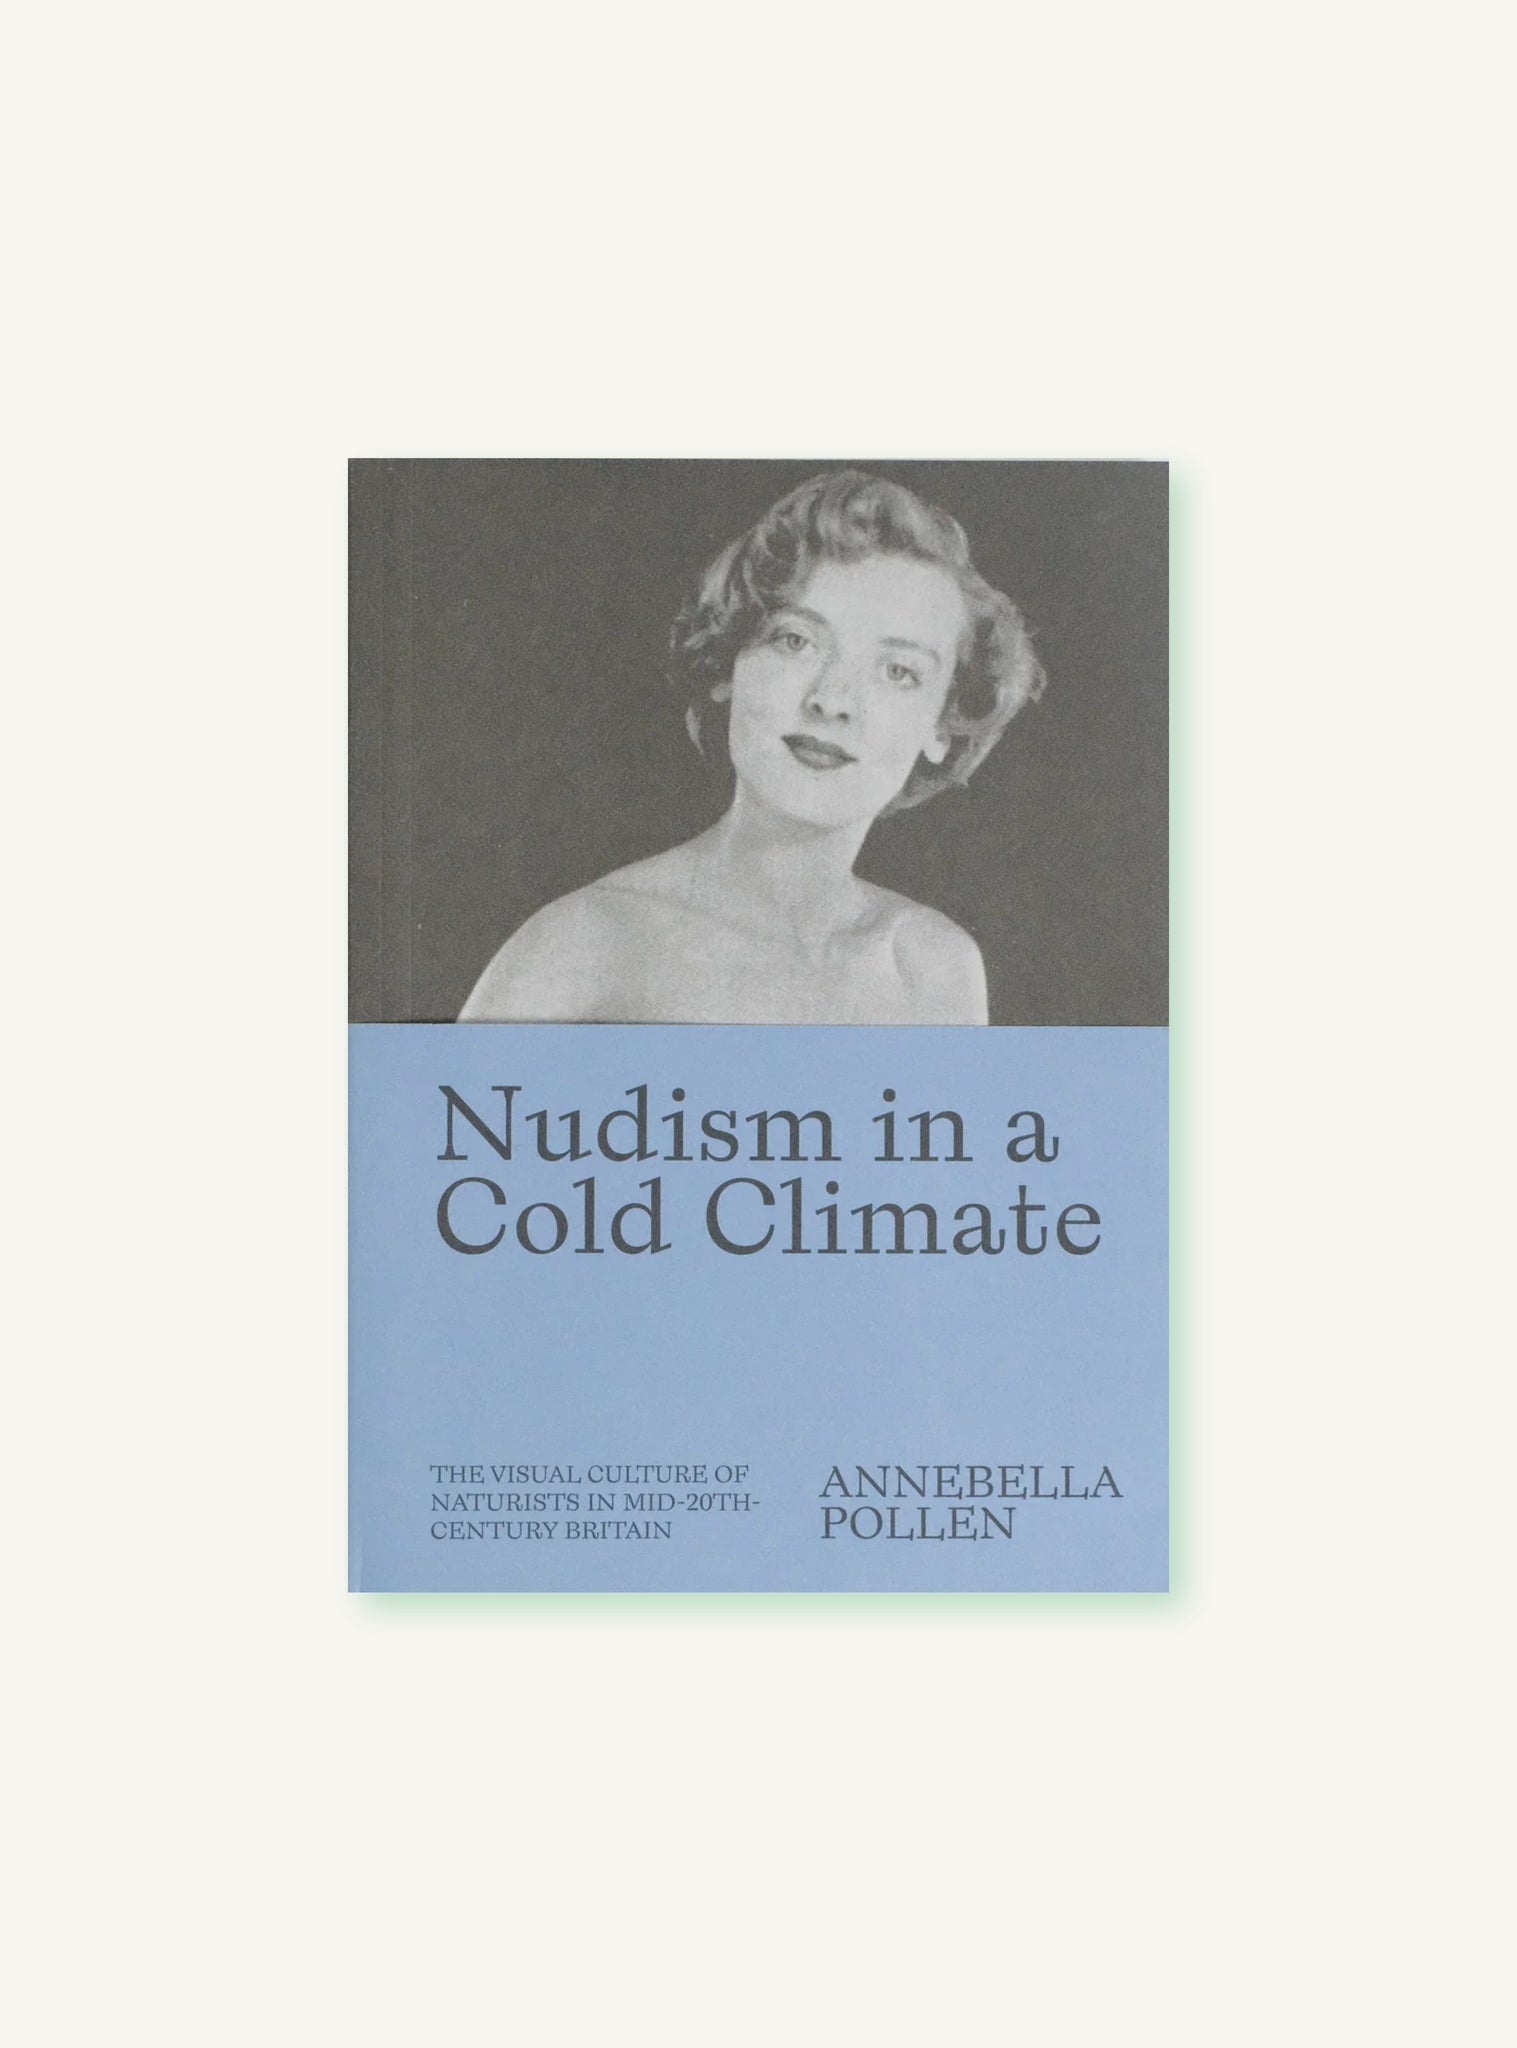 NUDISM IN A COLD CLIMATE by Annabella Pollen